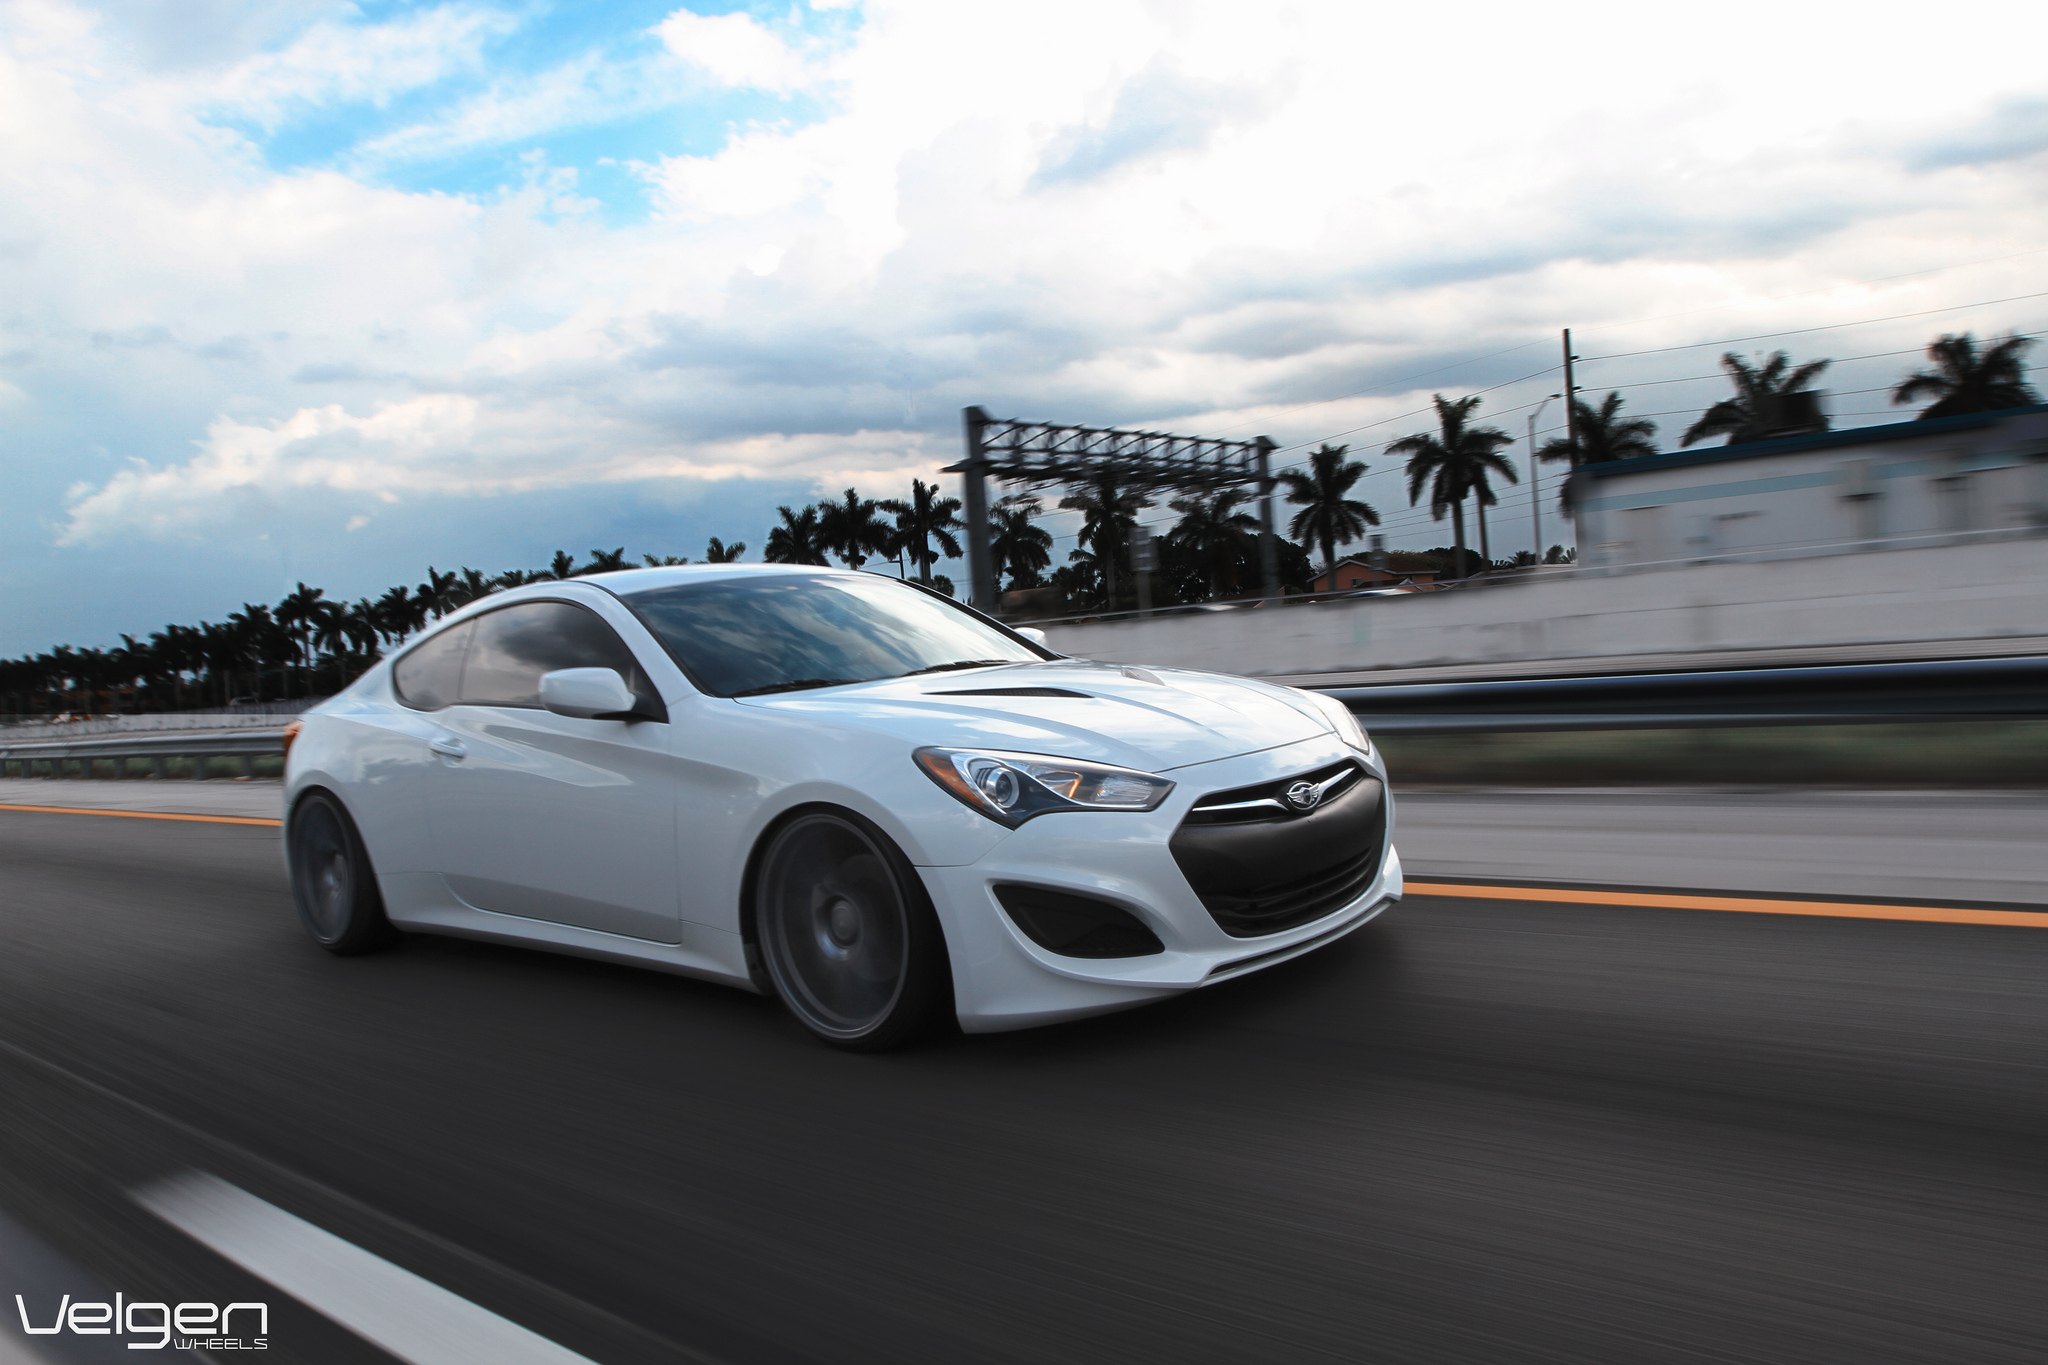 Custom Front Bumper on White Hyundai Genesis Coupe - Photo by Vossen